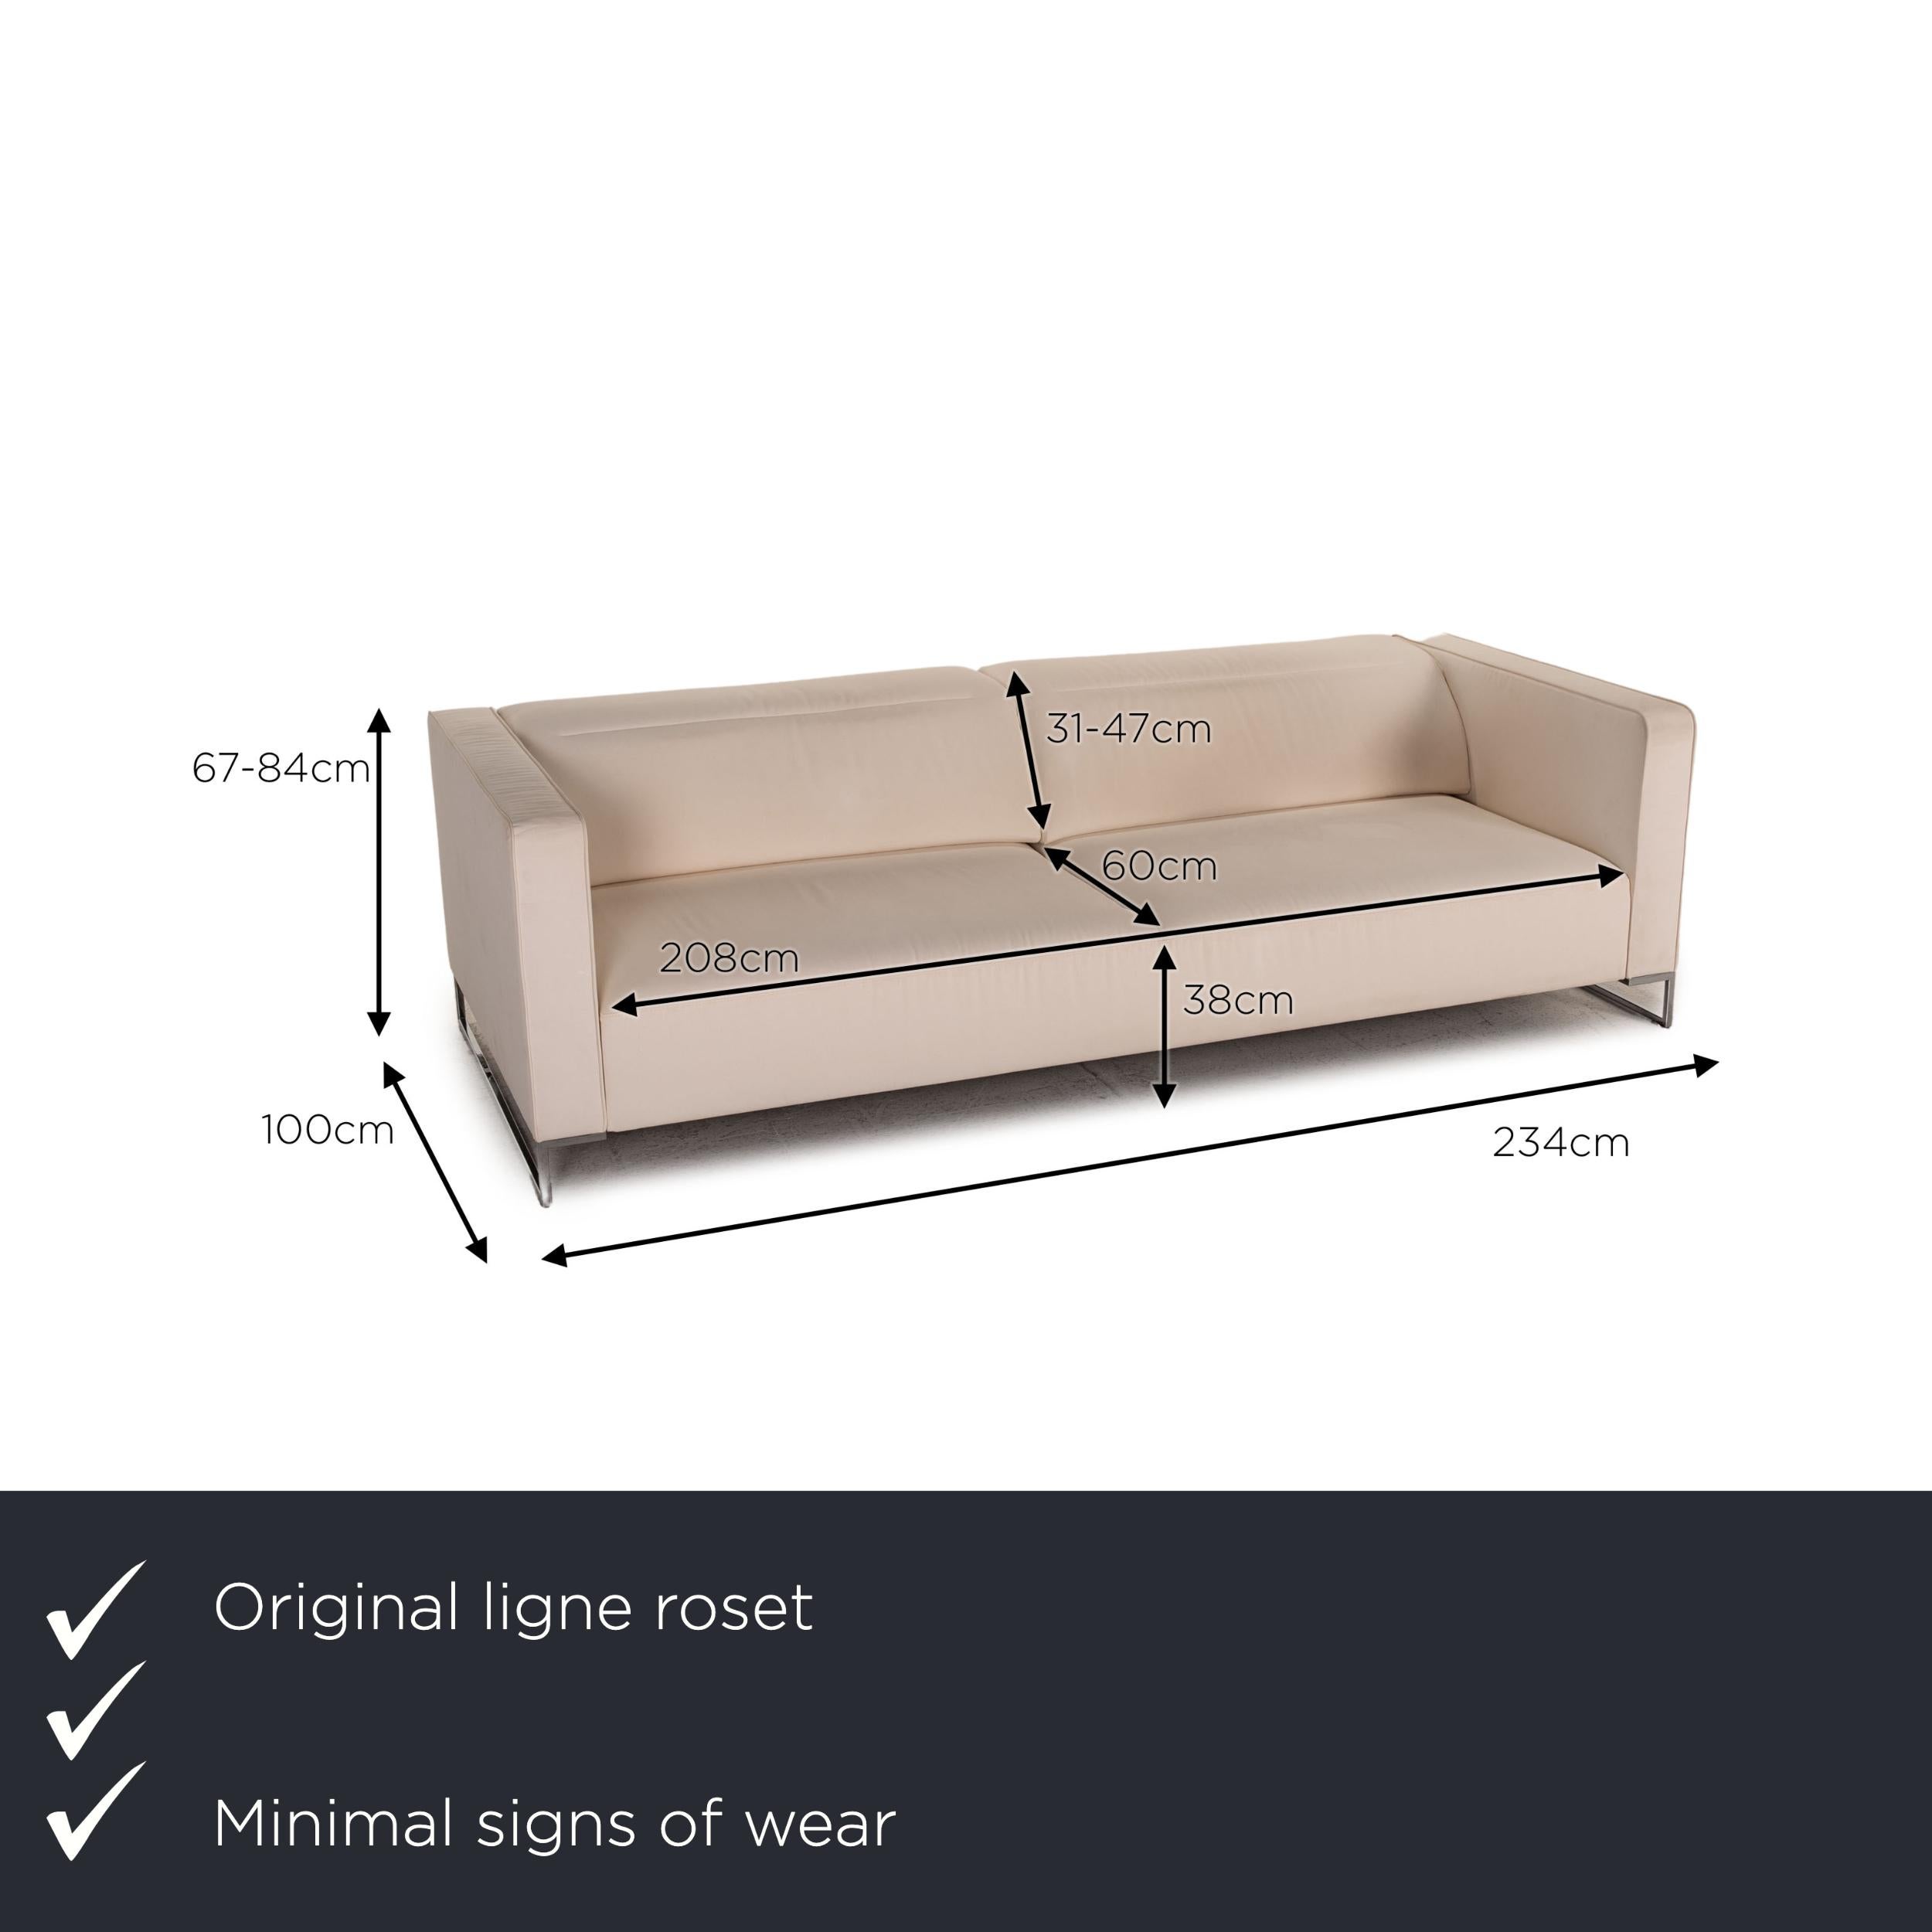 We present to you a ligne roset Urbani fabric sofa cream three-seater couch function.
  
 

 Product measurements in centimeters:
 

 depth: 100
 width: 234
 height: 67
 seat height: 38
 rest height: 67
 seat depth: 60
 seat width: